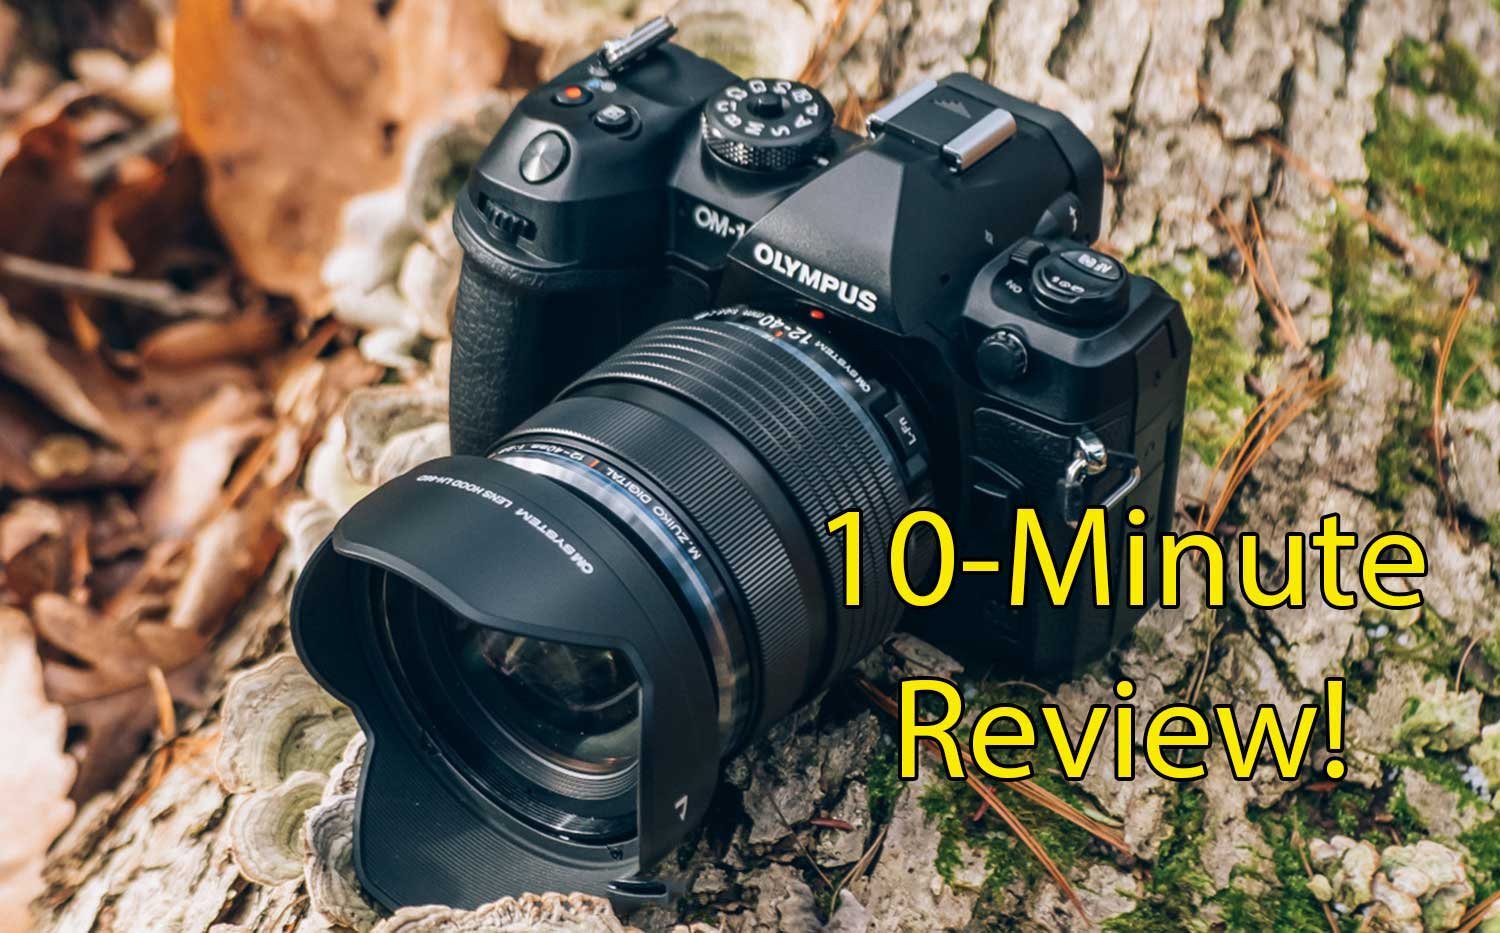 Photo Gear Reviews cover image